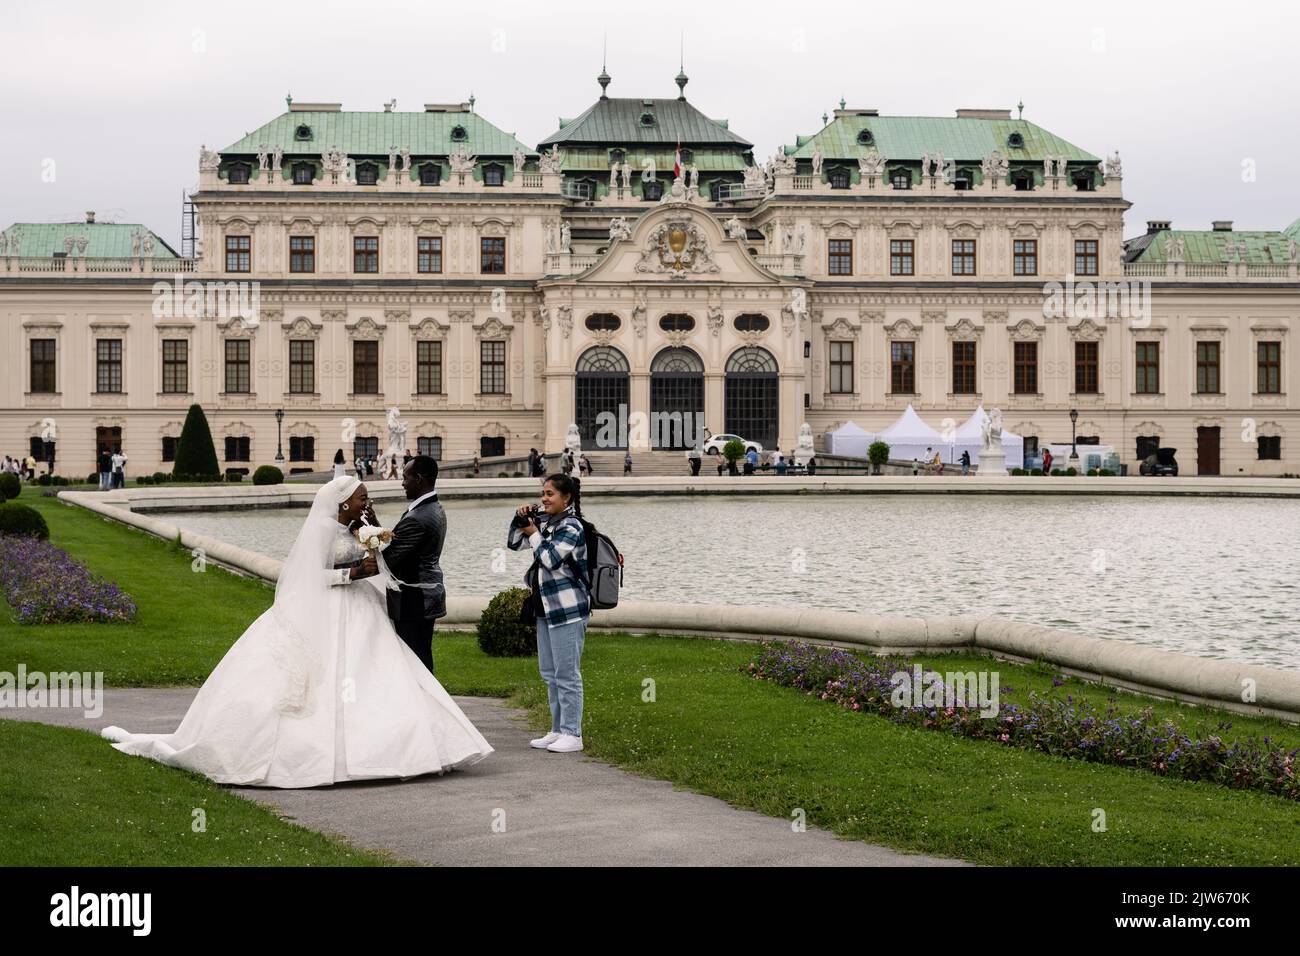 Vienna, Austria - August 6 2022: Bride and Groom in White Wedding Dress and Black Tuxedo with Photographer. Stock Photo